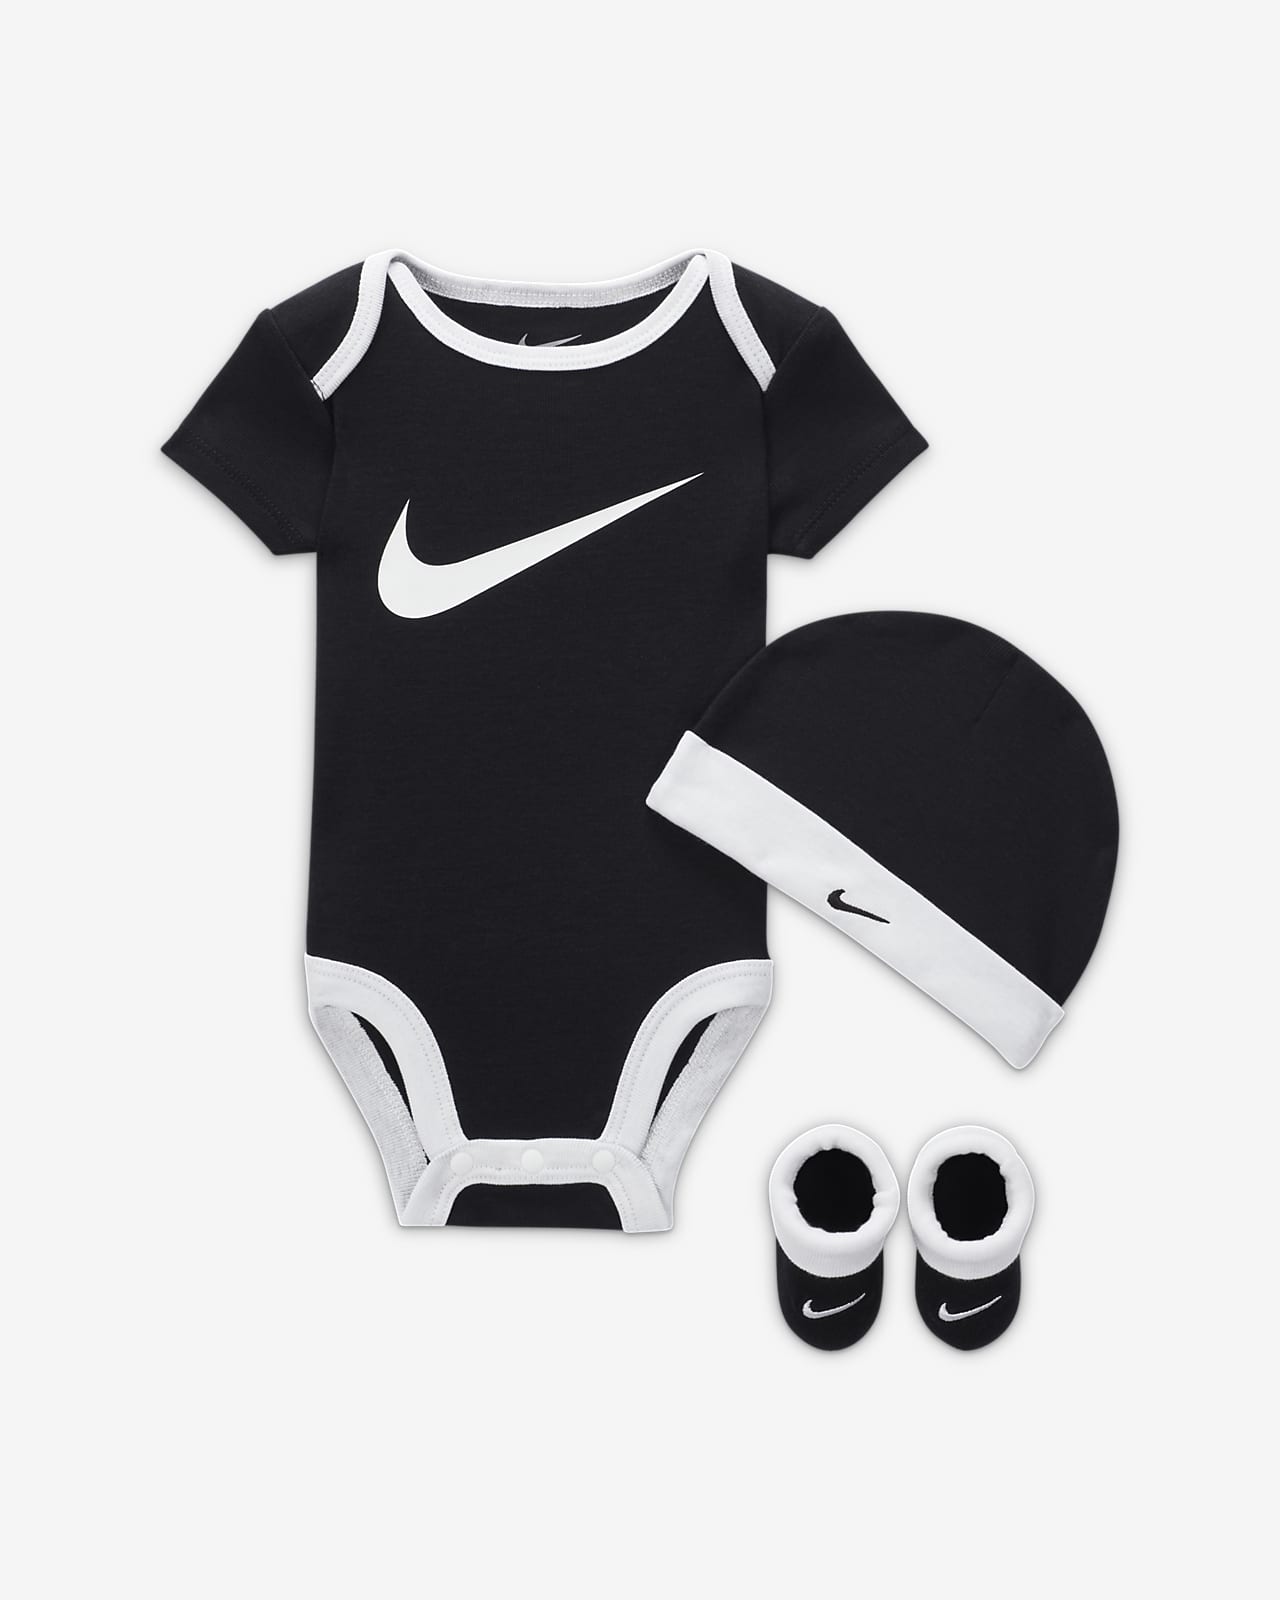 https://static.nike.com/a/images/t_PDP_1280_v1/f_auto,q_auto:eco/58e0b8fb-6020-433c-bd20-804f6d6c9d01/baby-0-6m-bodysuit-hat-and-booties-box-set-TzT1mg.png